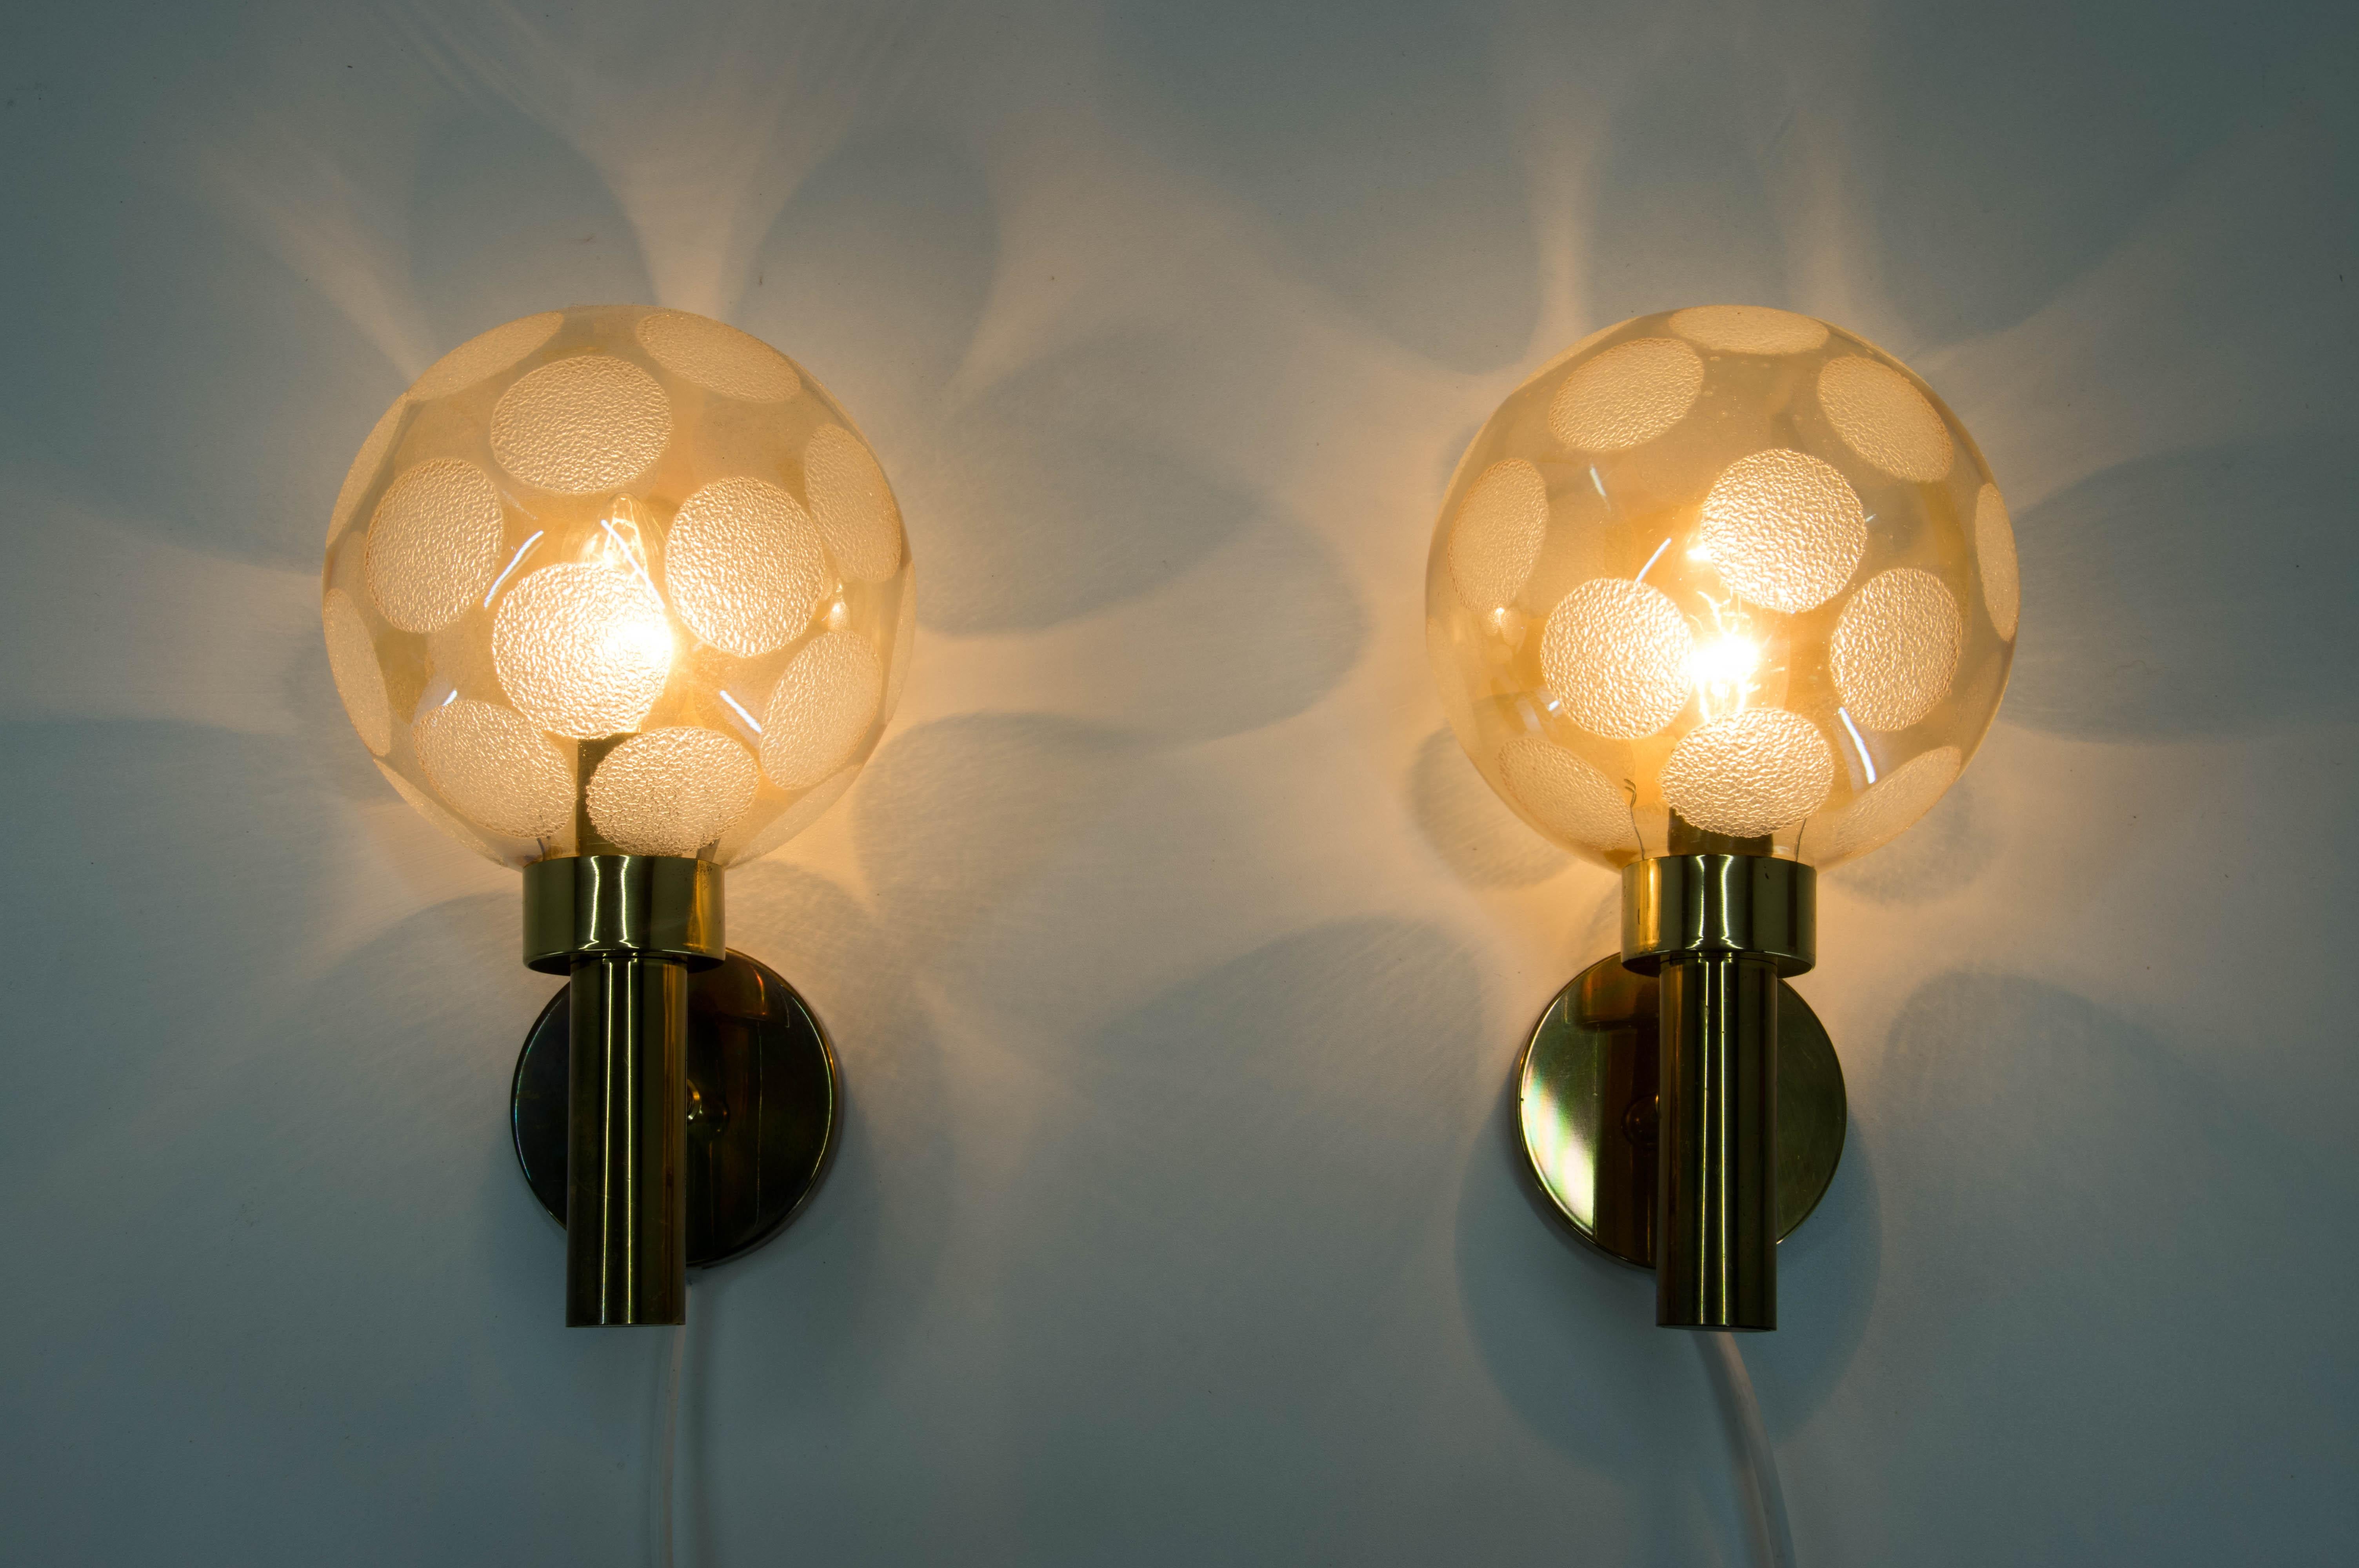 Pair of brass and glass wall lamps, made in Denmark in 1970s
Very good condition
E14 bulb.